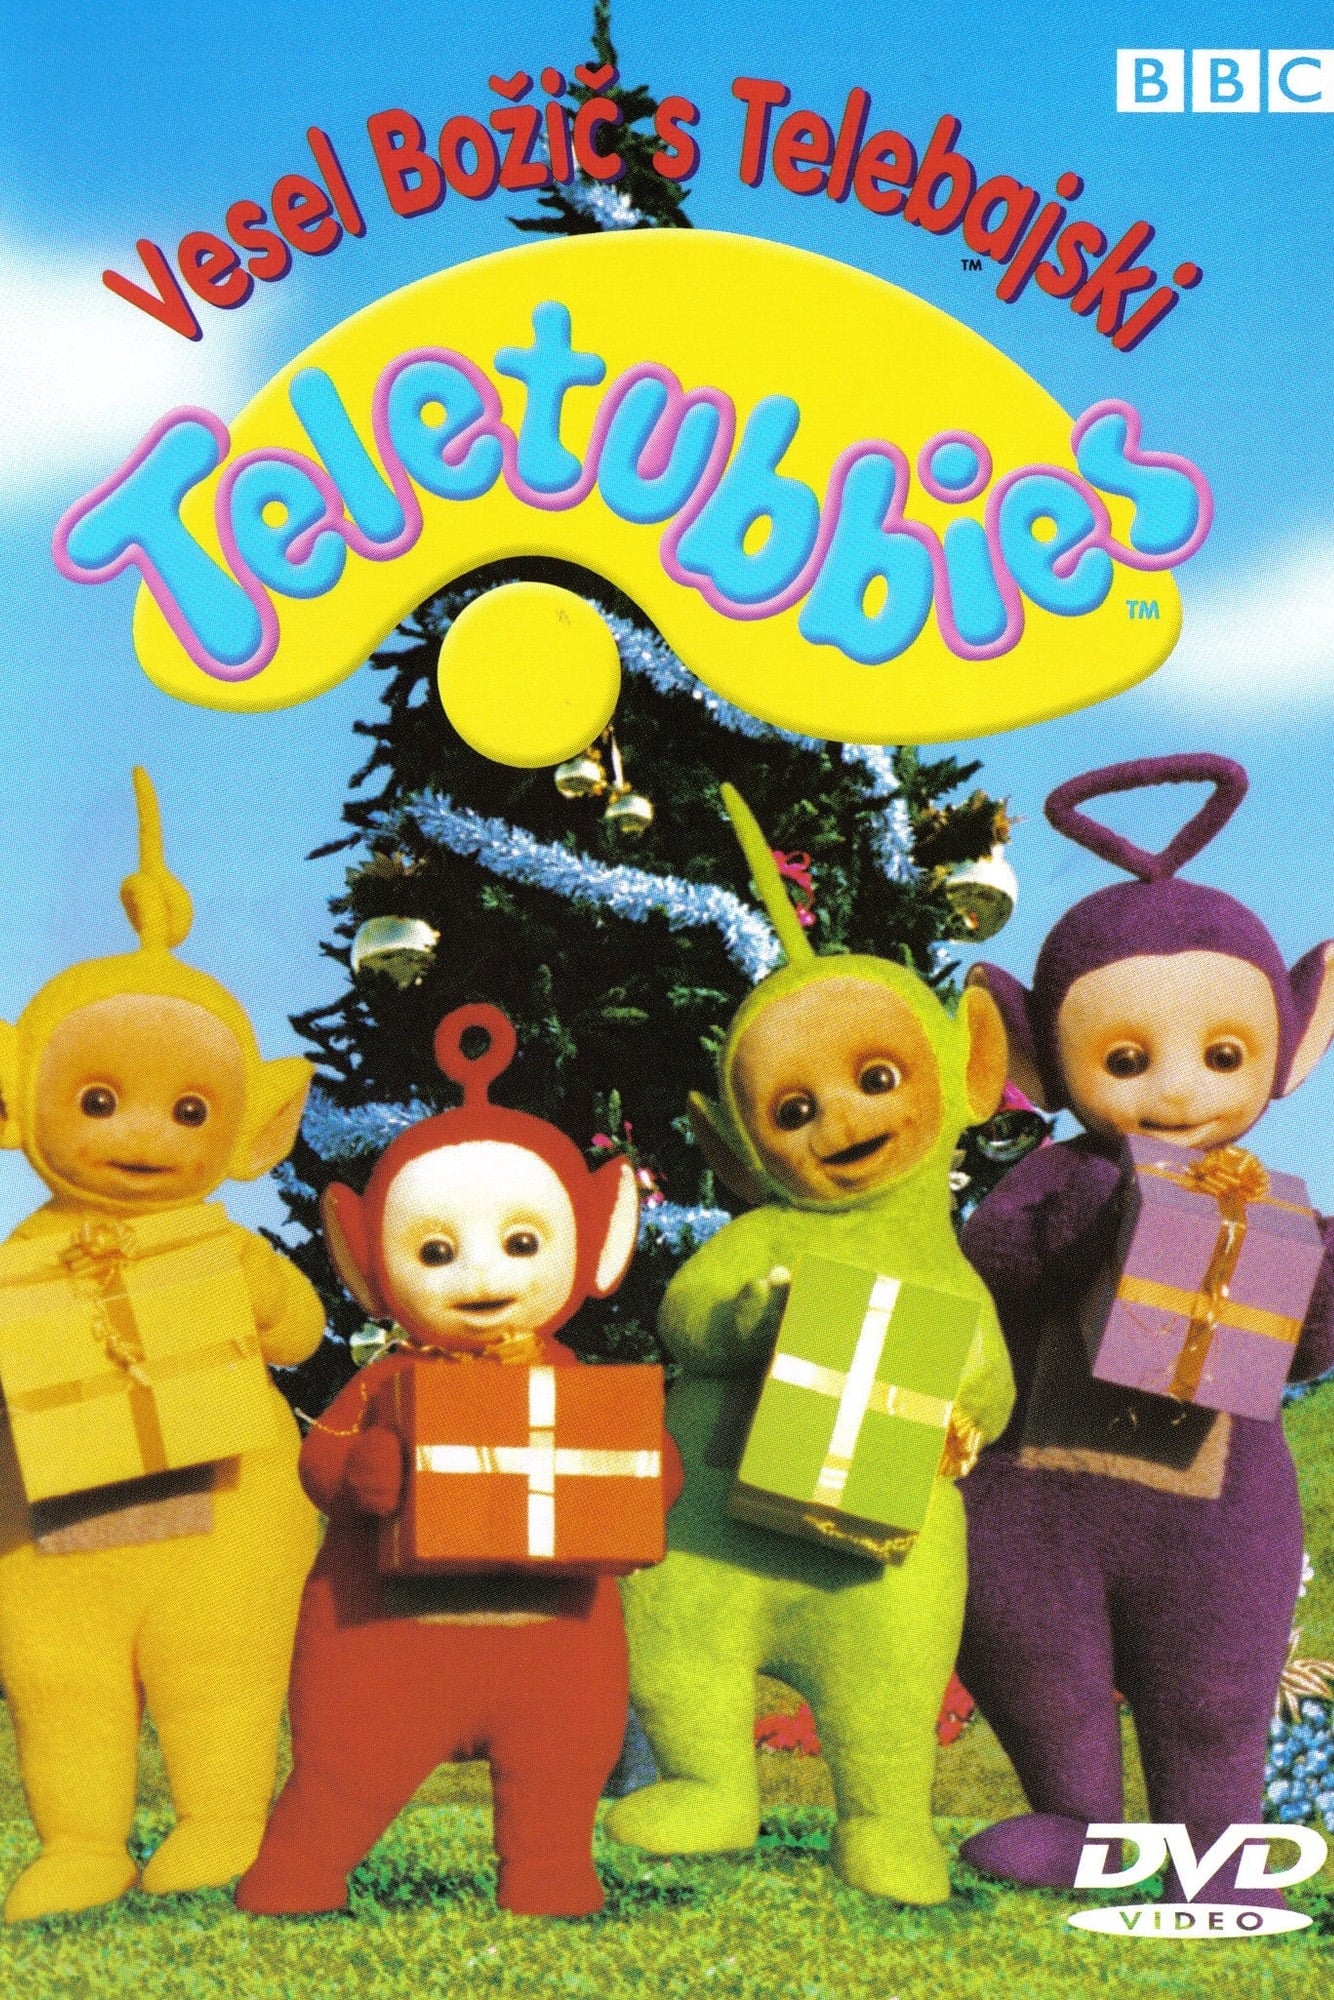 Happy Christmas from the Teletubbies